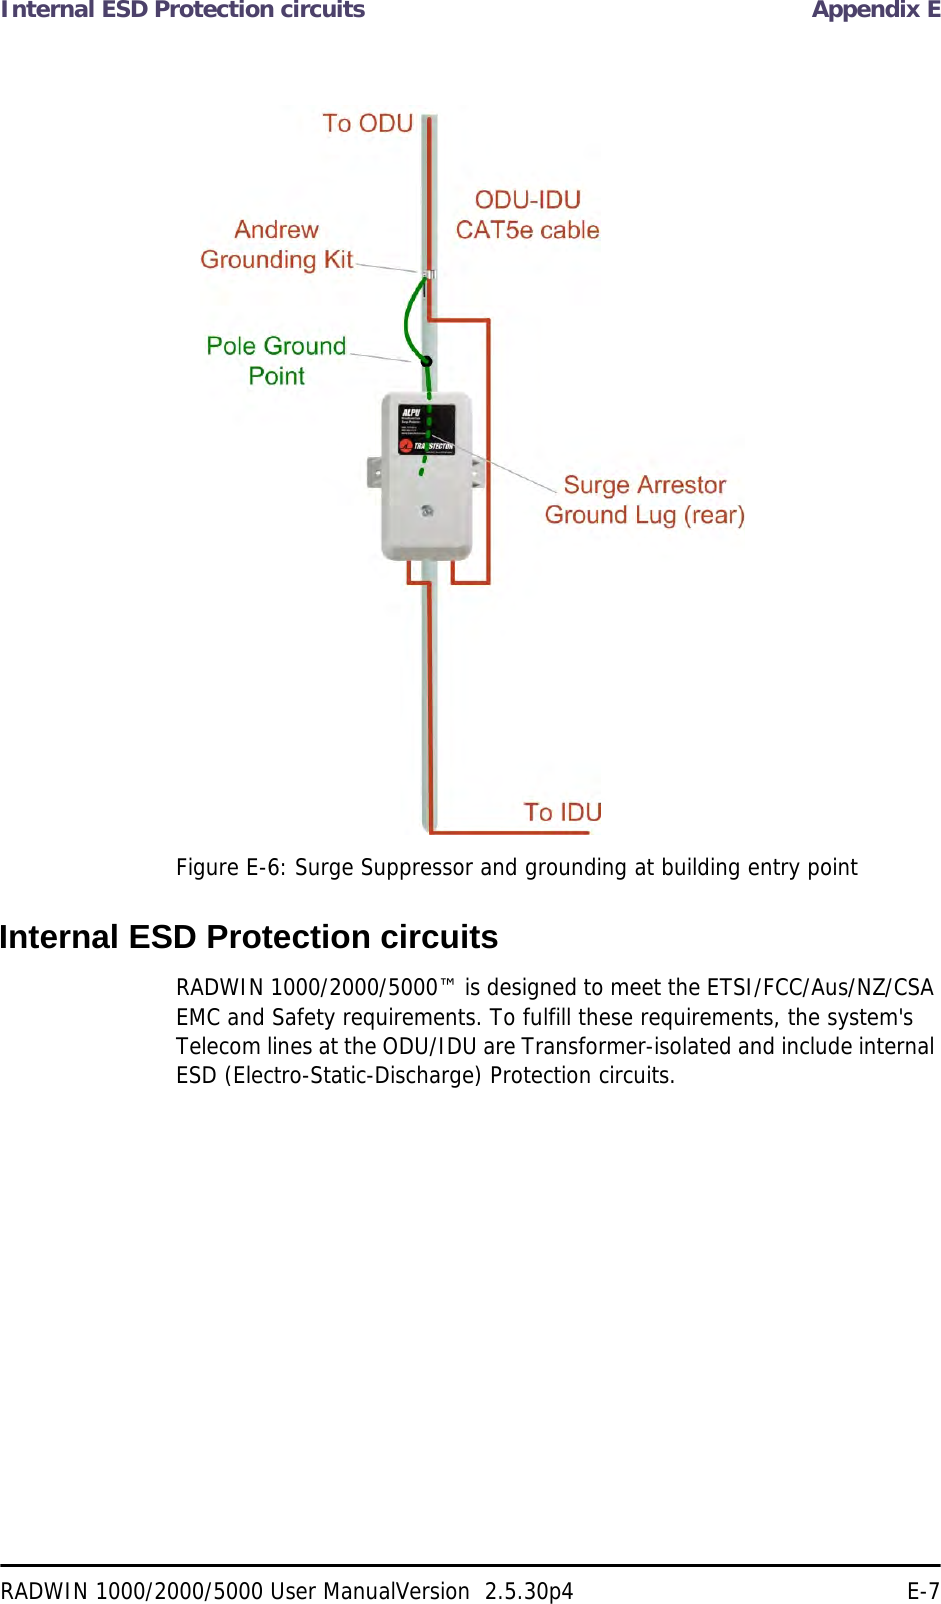 Internal ESD Protection circuits Appendix ERADWIN 1000/2000/5000 User ManualVersion  2.5.30p4 E-7Figure E-6: Surge Suppressor and grounding at building entry pointInternal ESD Protection circuitsRADWIN 1000/2000/5000™ is designed to meet the ETSI/FCC/Aus/NZ/CSA EMC and Safety requirements. To fulfill these requirements, the system&apos;s Telecom lines at the ODU/IDU are Transformer-isolated and include internal ESD (Electro-Static-Discharge) Protection circuits.